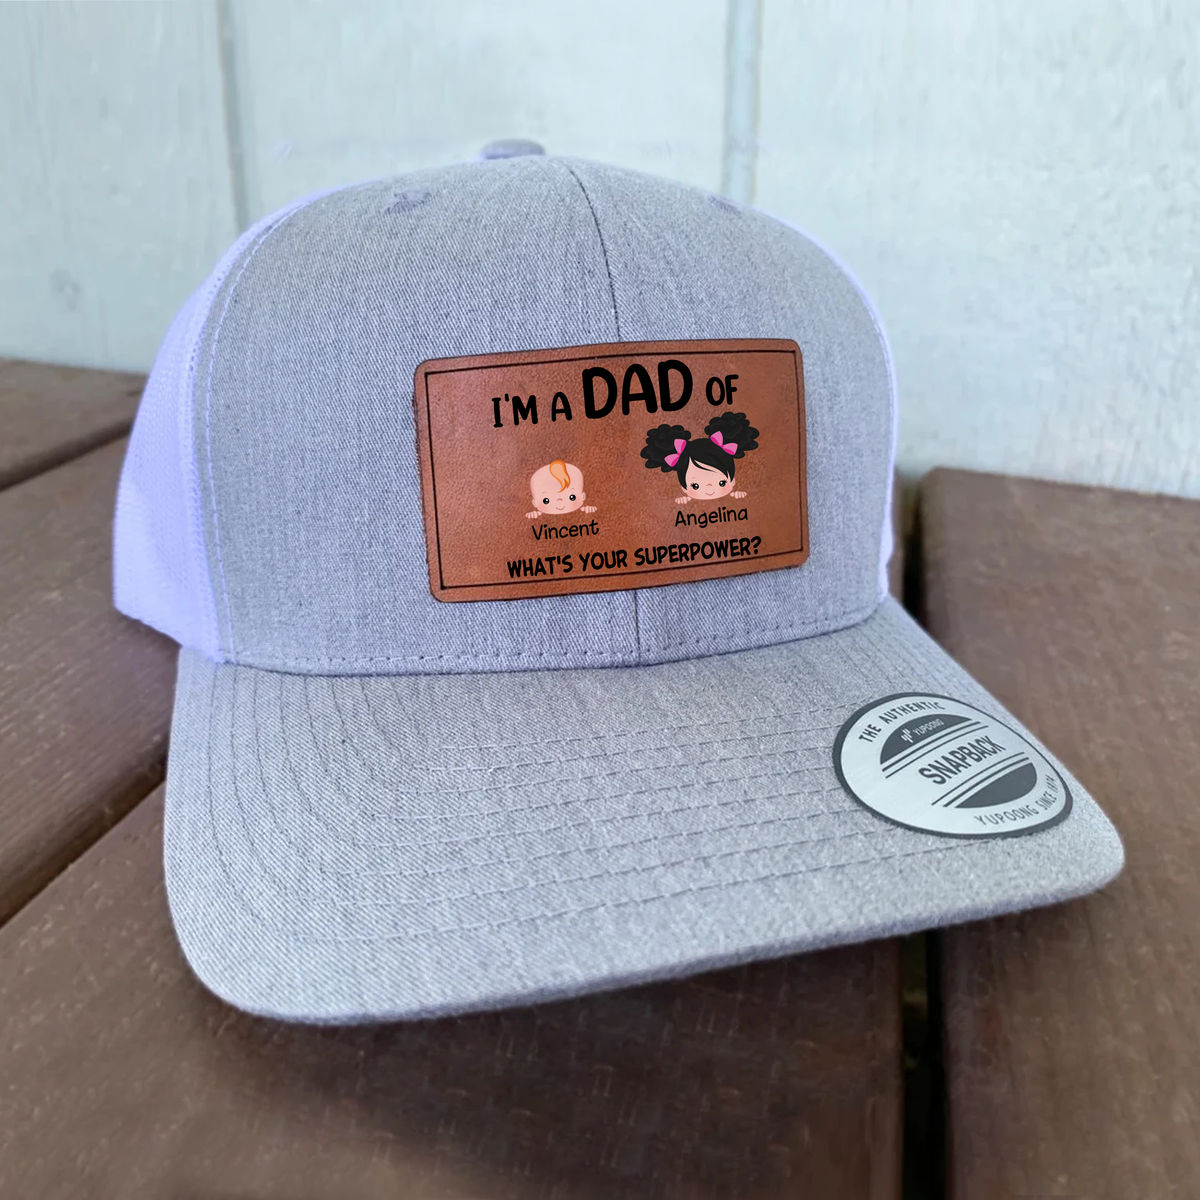 Father's Day Gifts - I'm A Dad Of Kid What's Your Superpower? (Ver 2) - Personalized Cap_1